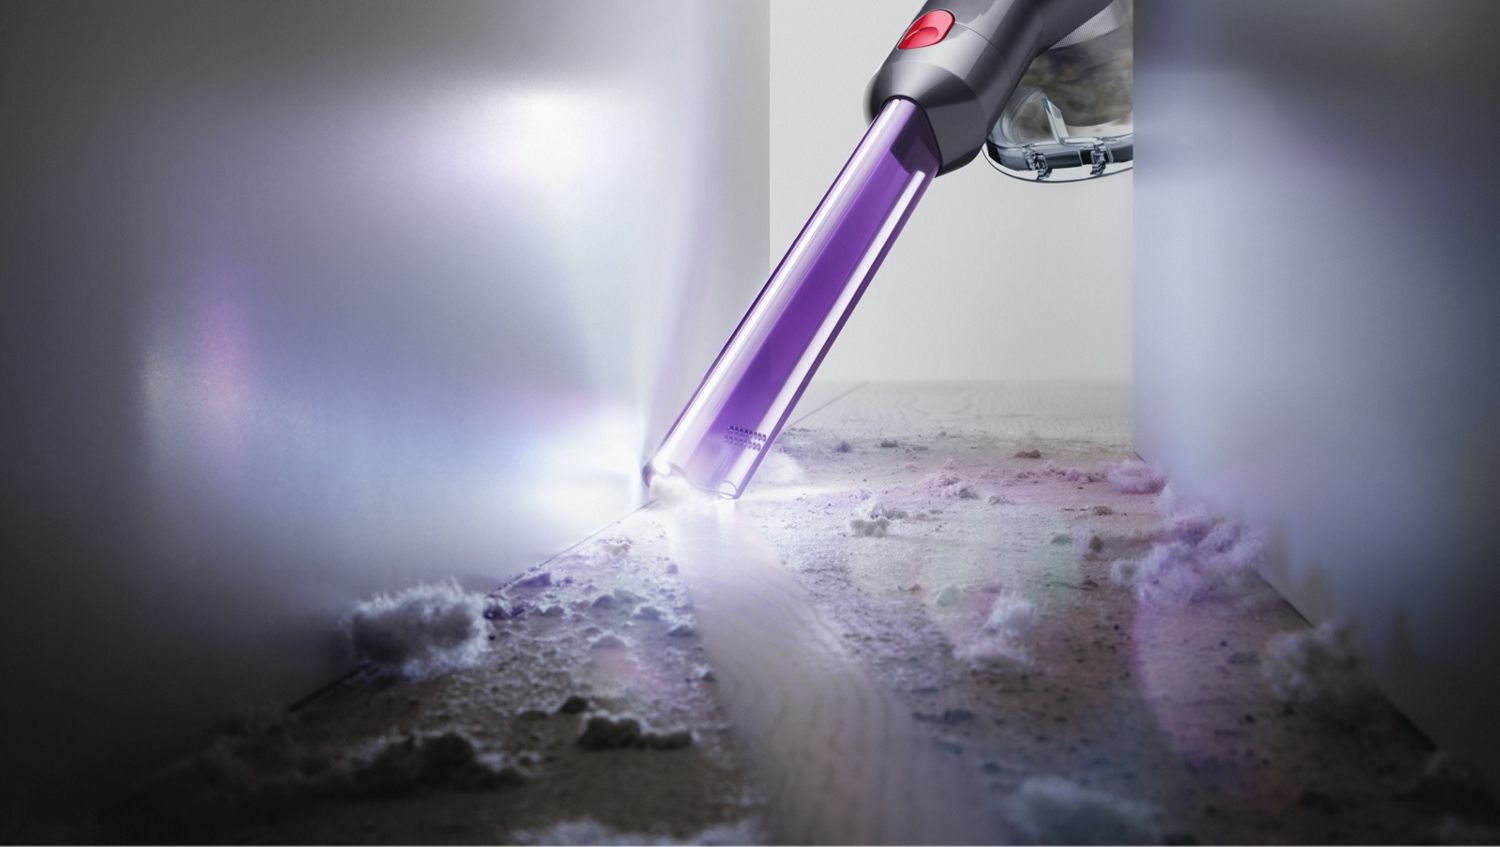 Specialist cleaning kit | Dyson